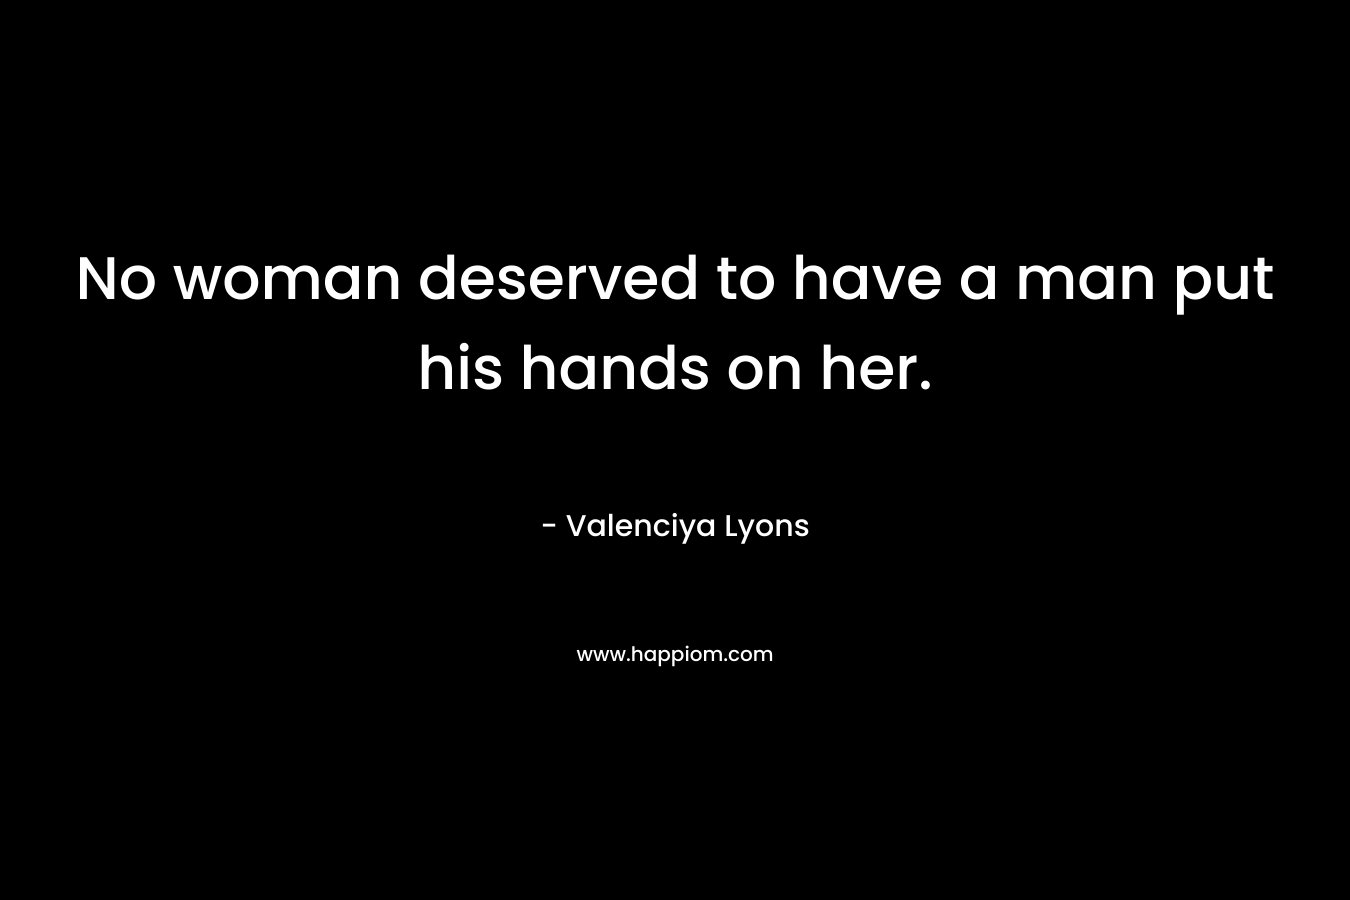 No woman deserved to have a man put his hands on her.